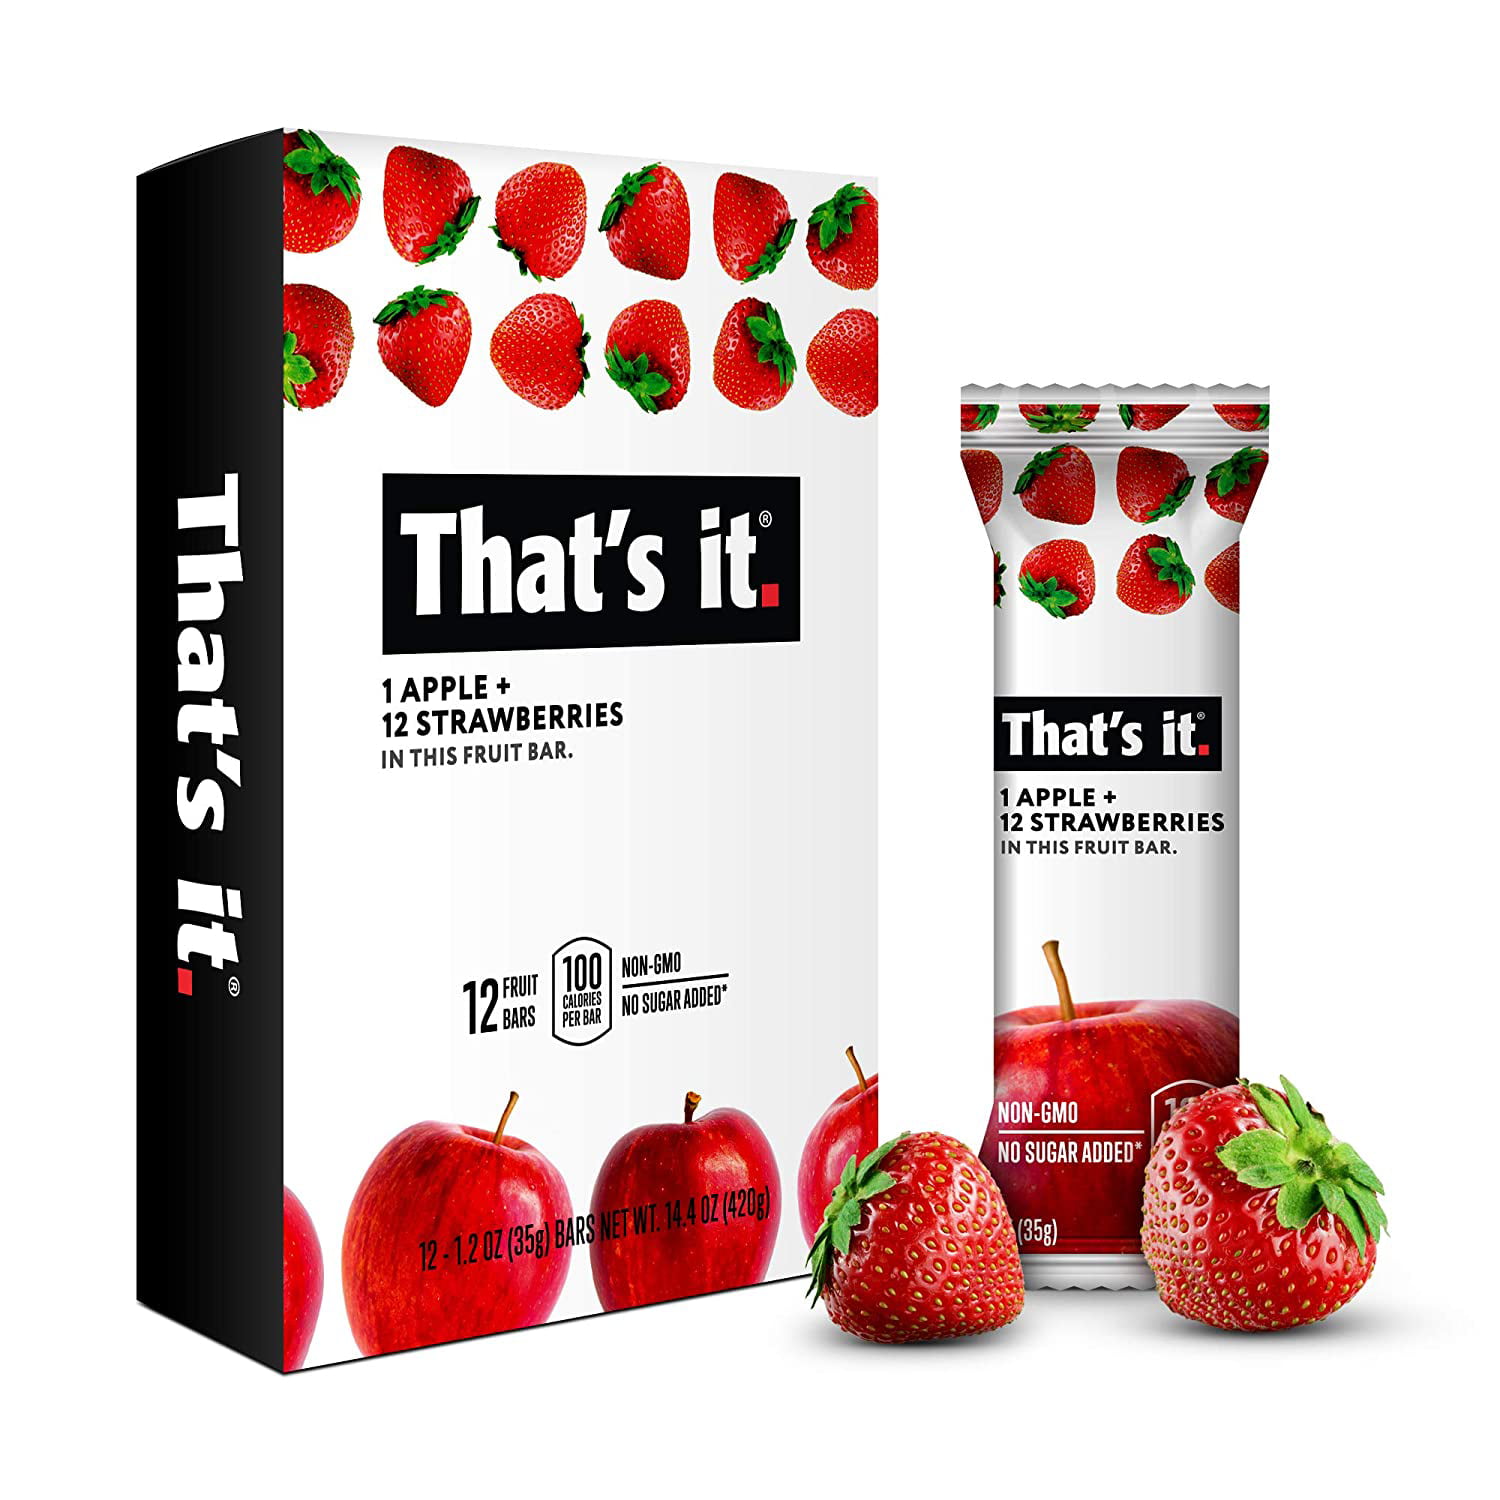 That&amp;#39;s it. Apple + Strawberry 100% Natural Real Fruit Bar, Best High Fiber Vegan, Gluten Free Healthy Snack, Paleo for Children &amp; Adults, Non GMO No Sugar Added, No Preservatives Energy Food (12 Pack)